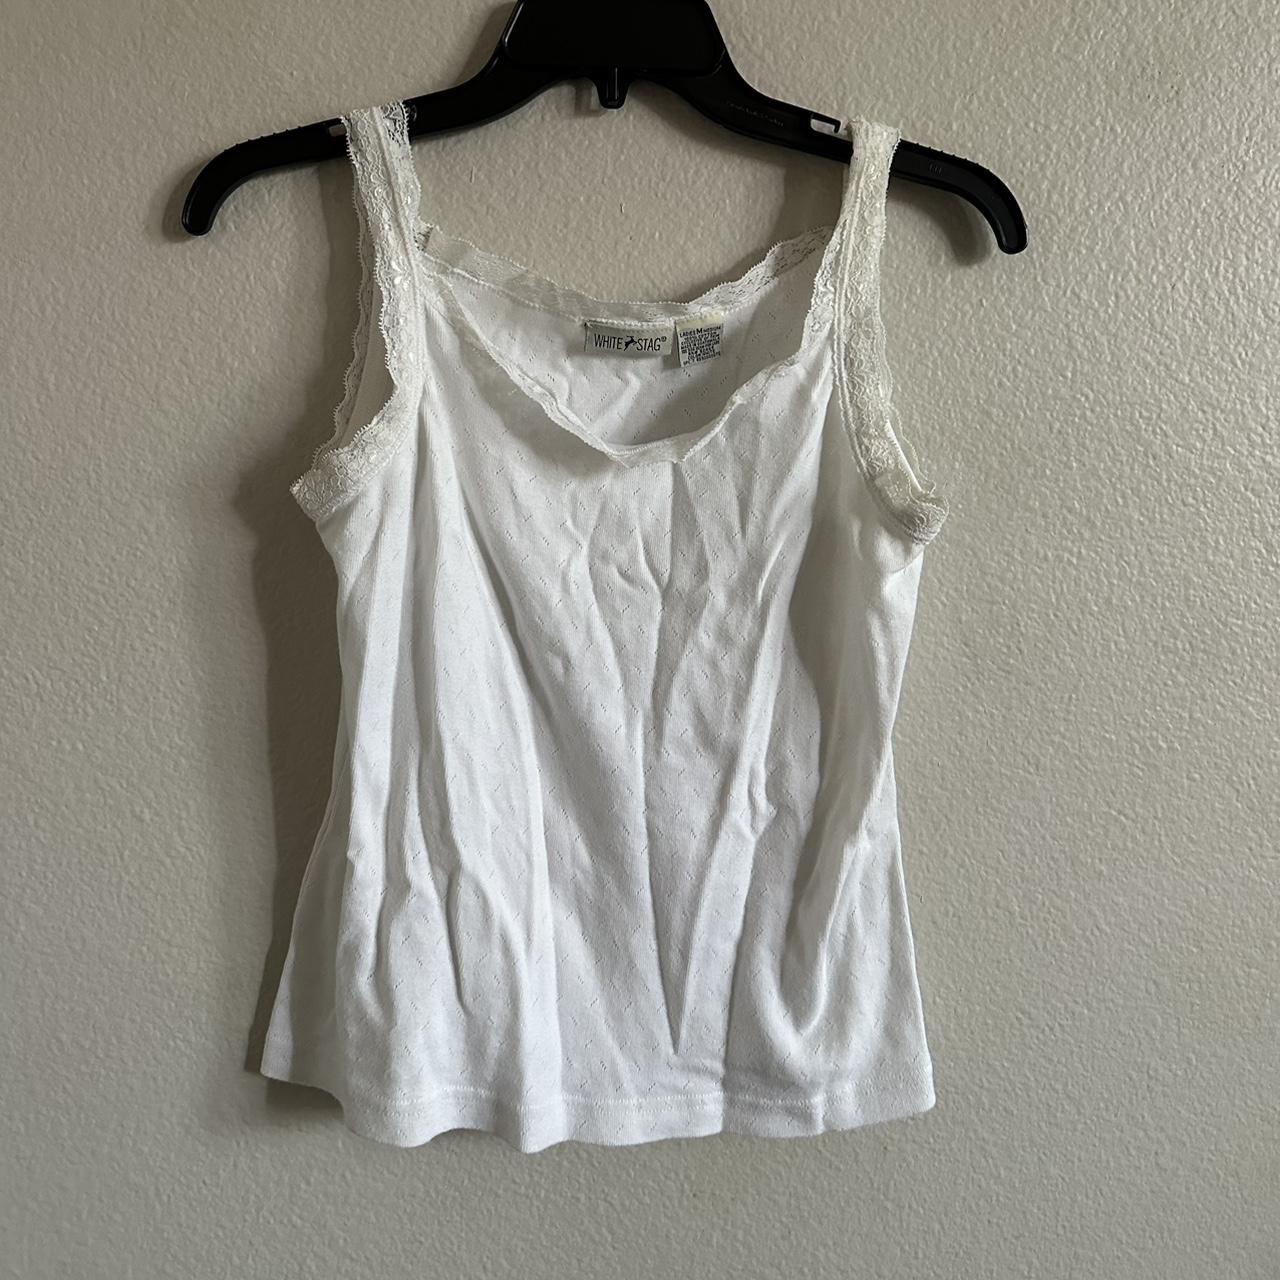 Lacey Tank Top -cutest tank top to wear on its own... - Depop